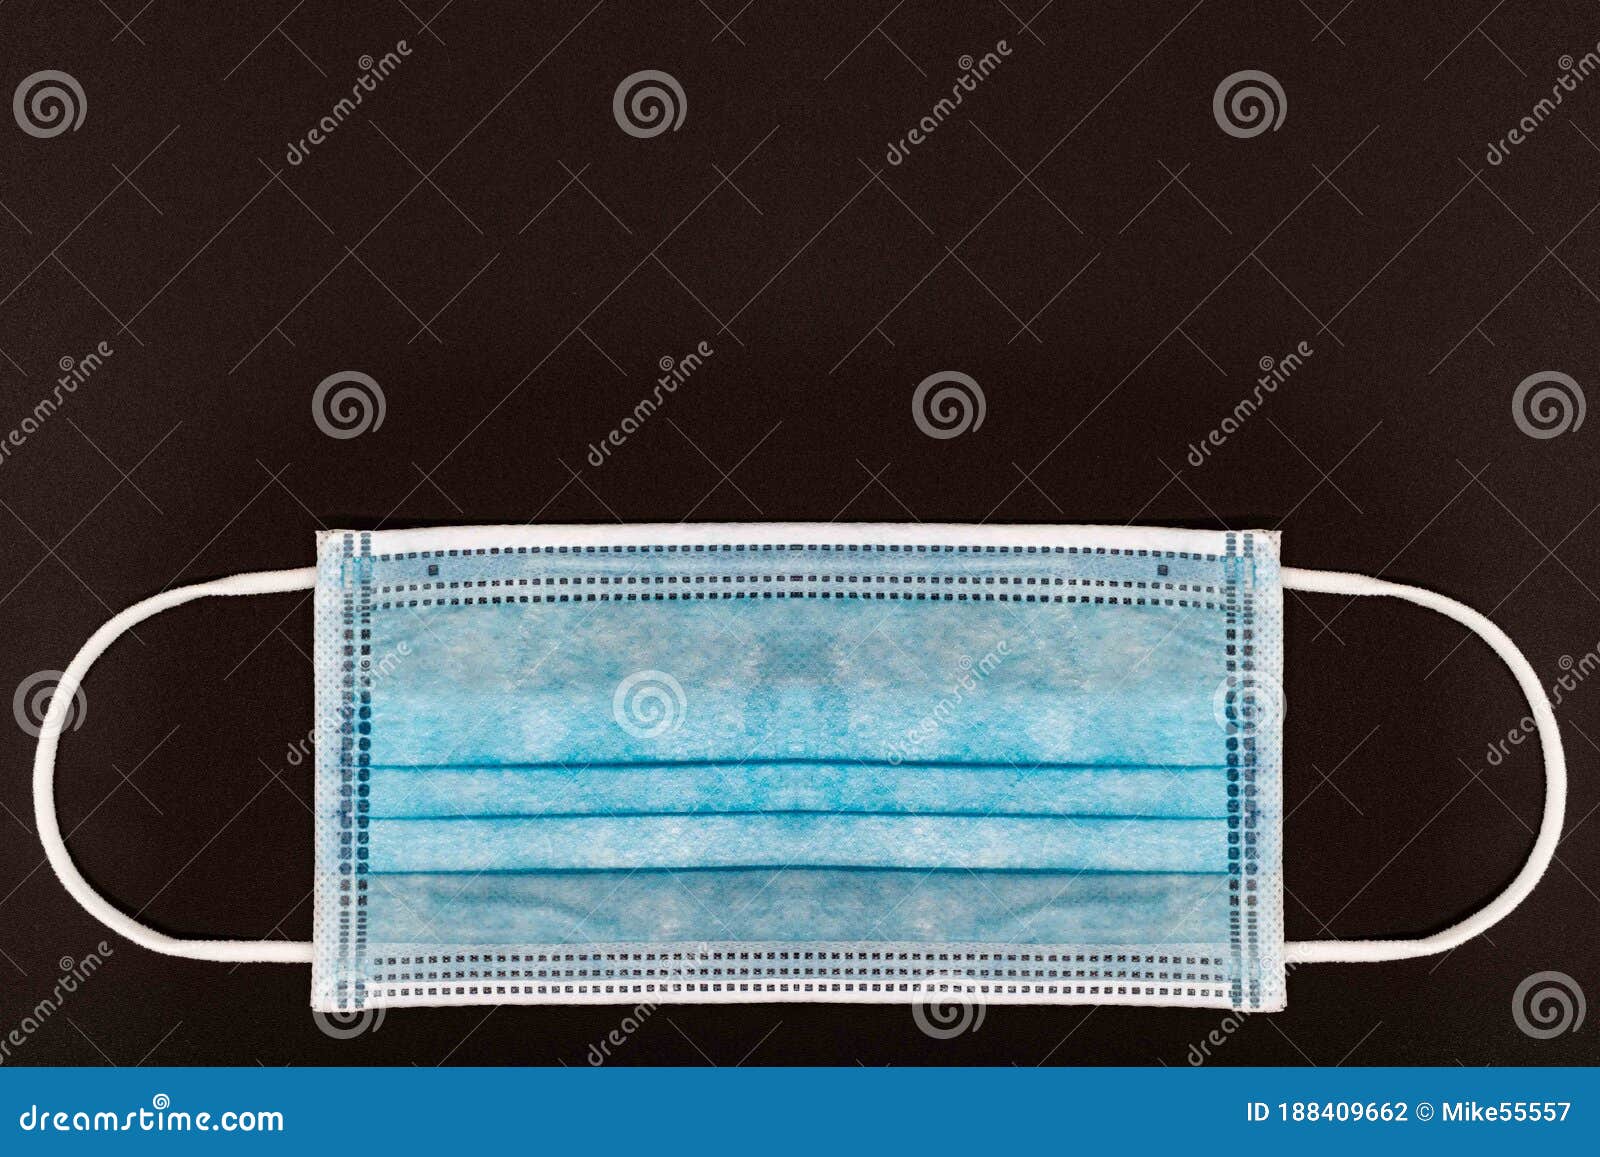 blue medical or surgical face mask. virus protection. black background. space for entering text